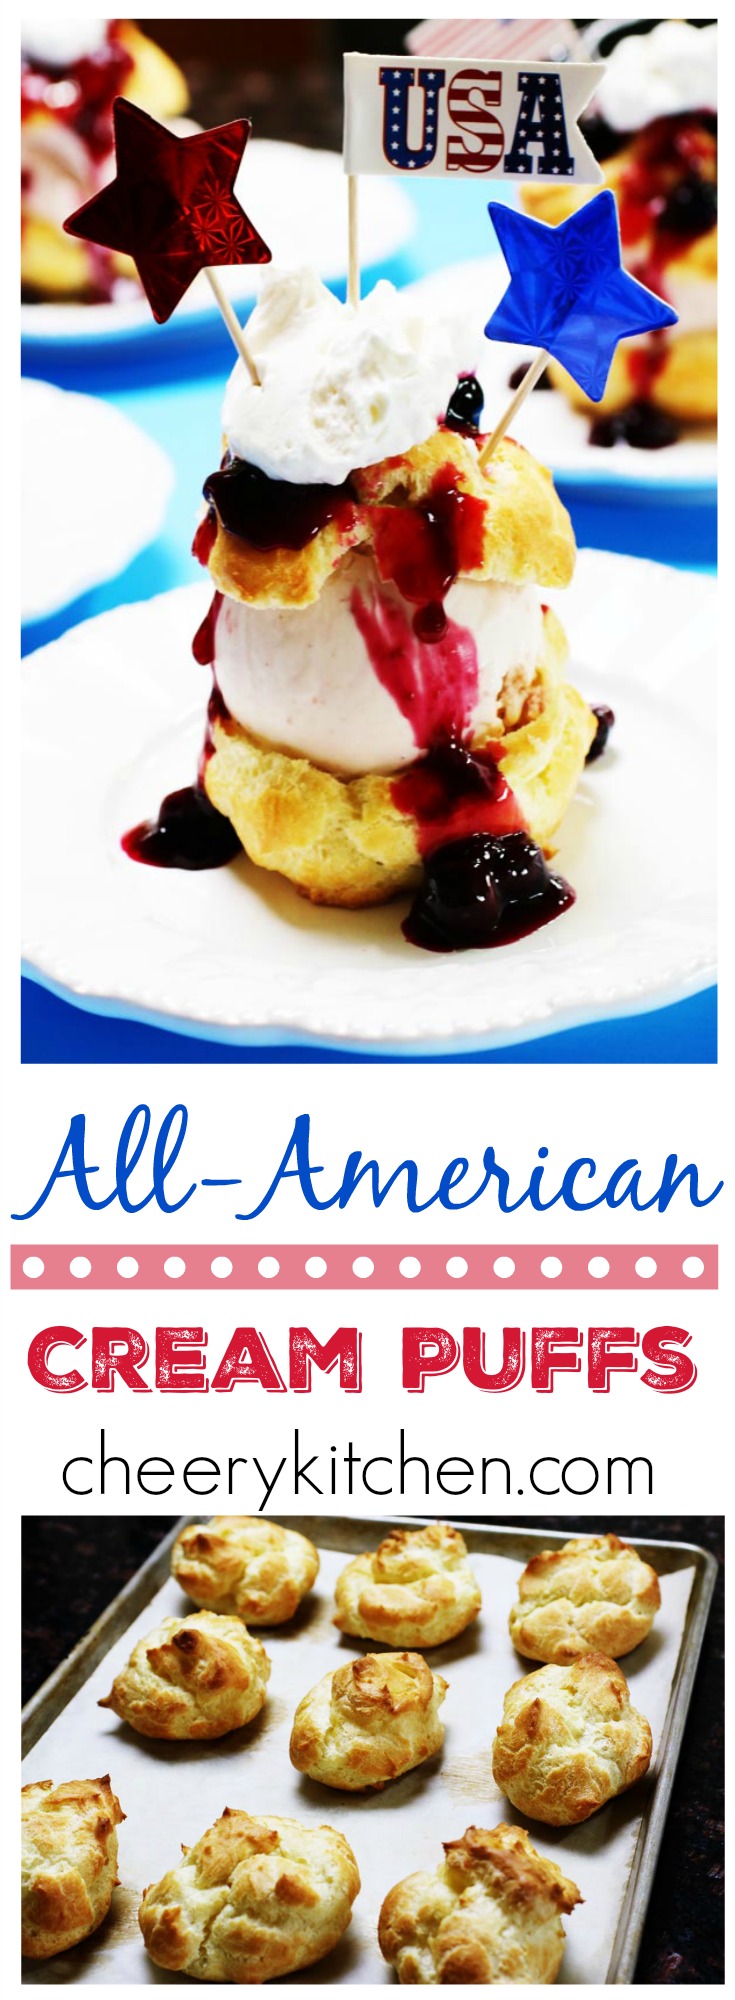 Celebrate summer with All-American Cream Puffs. Bake some up, add a scoop of frosty ice cream, drizzle with blueberry sauce, and add a dollop of cream, for a flag waving patriotic dessert everyone will cheer for!